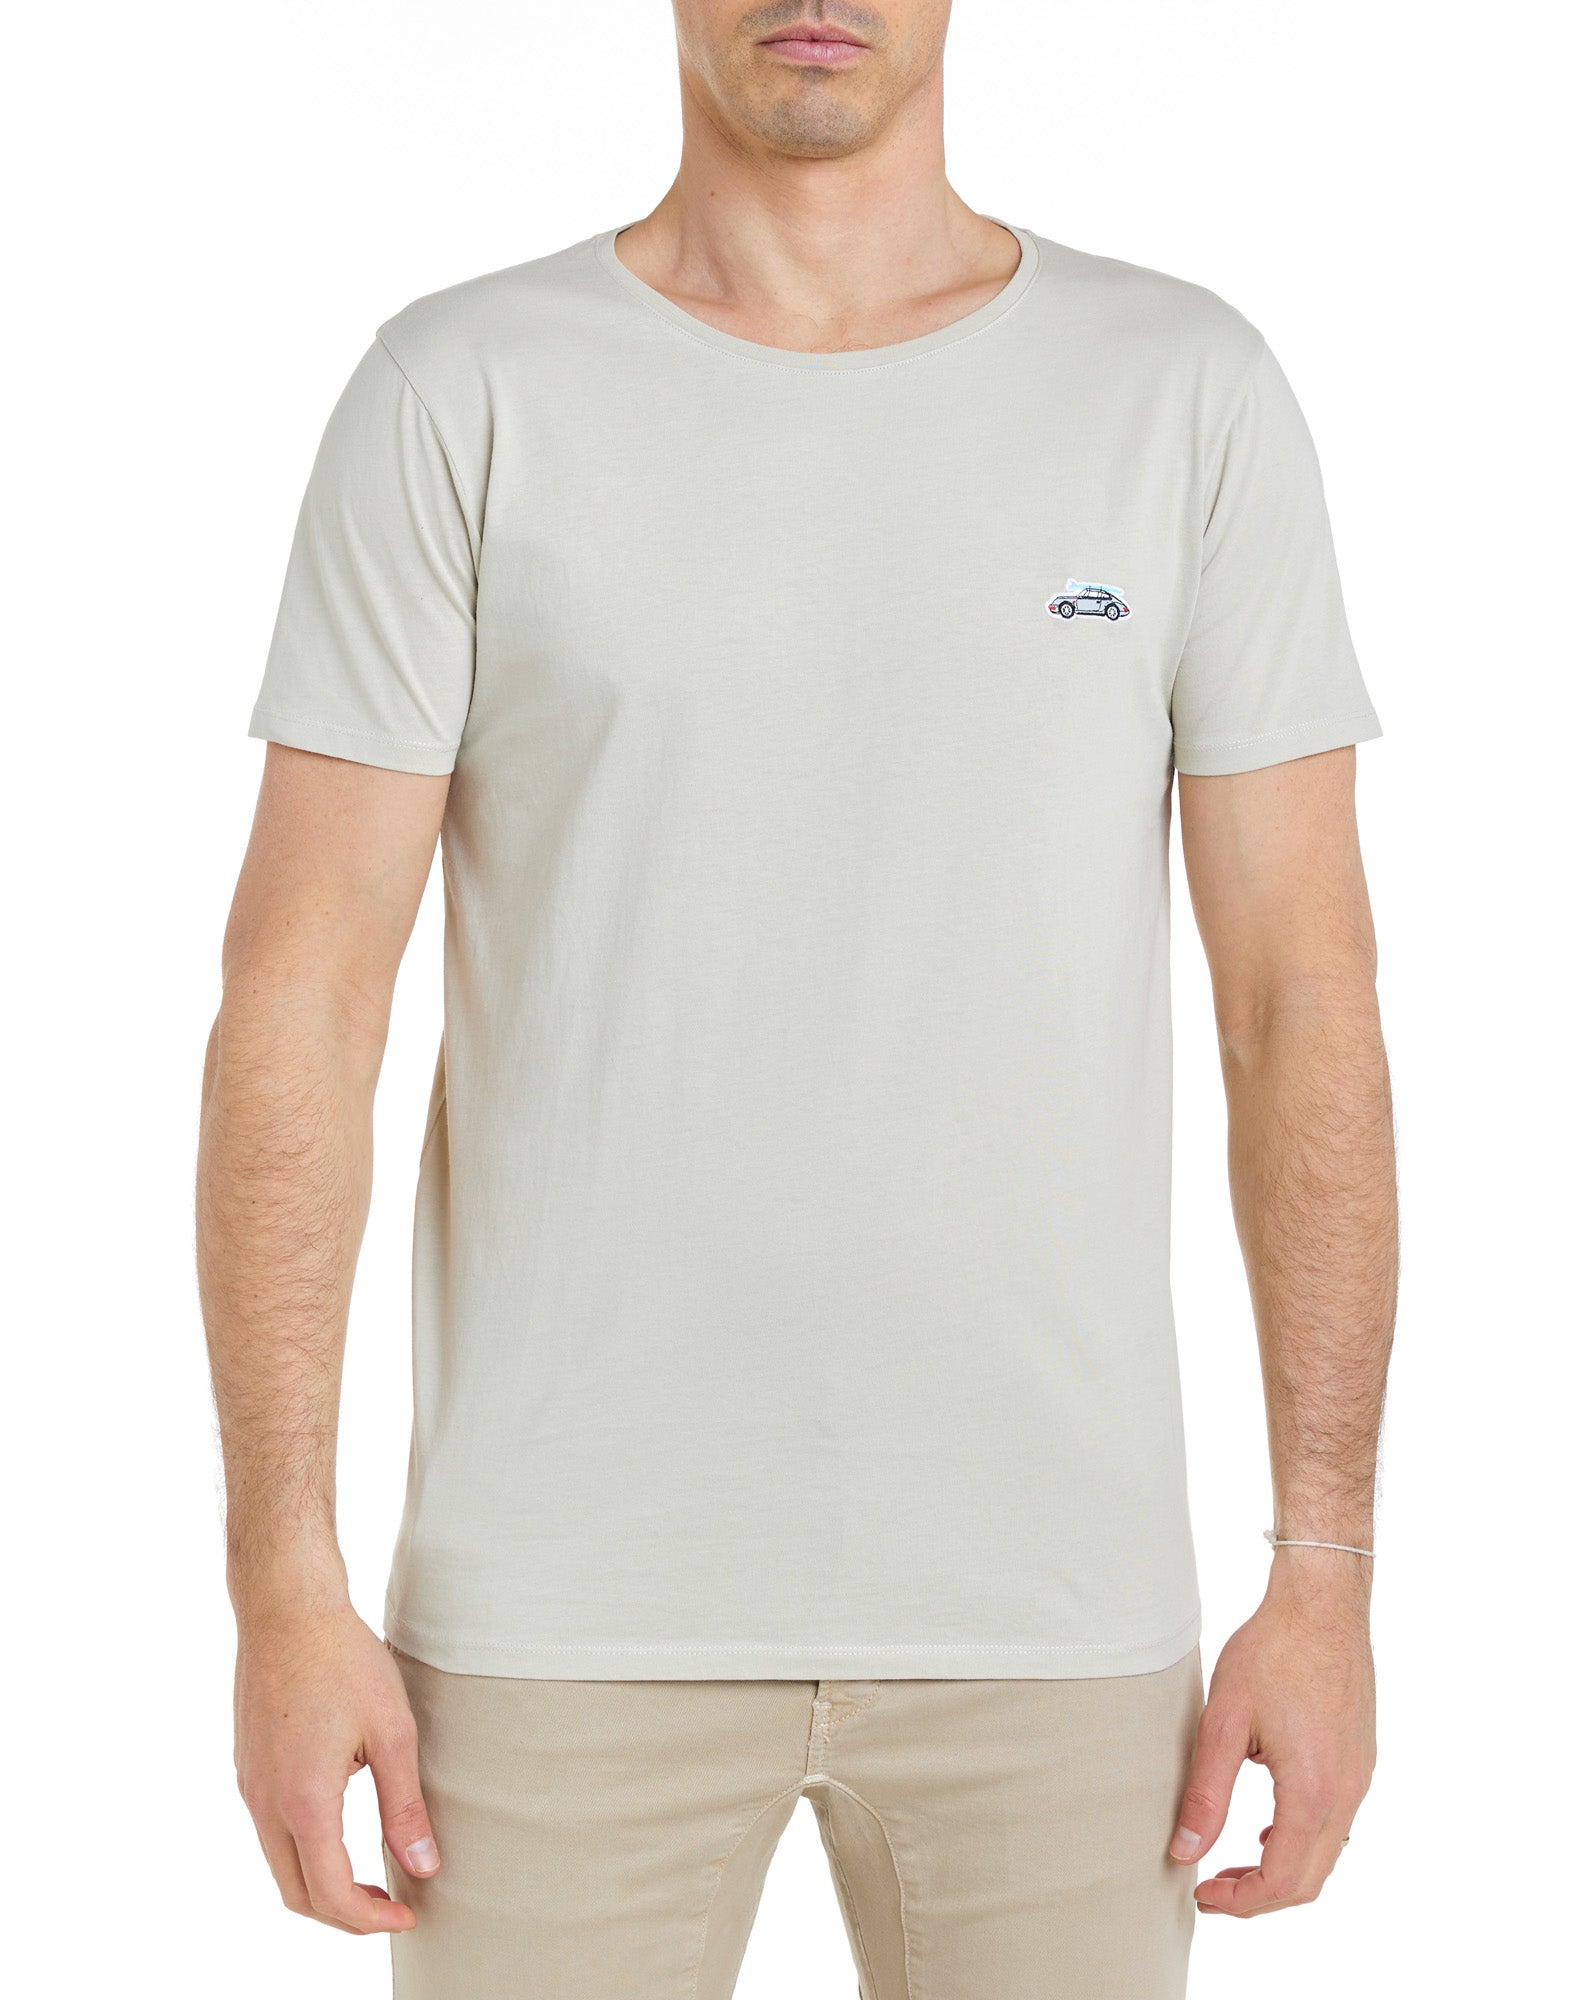 PULLIN Patch Tee - SURF FAST